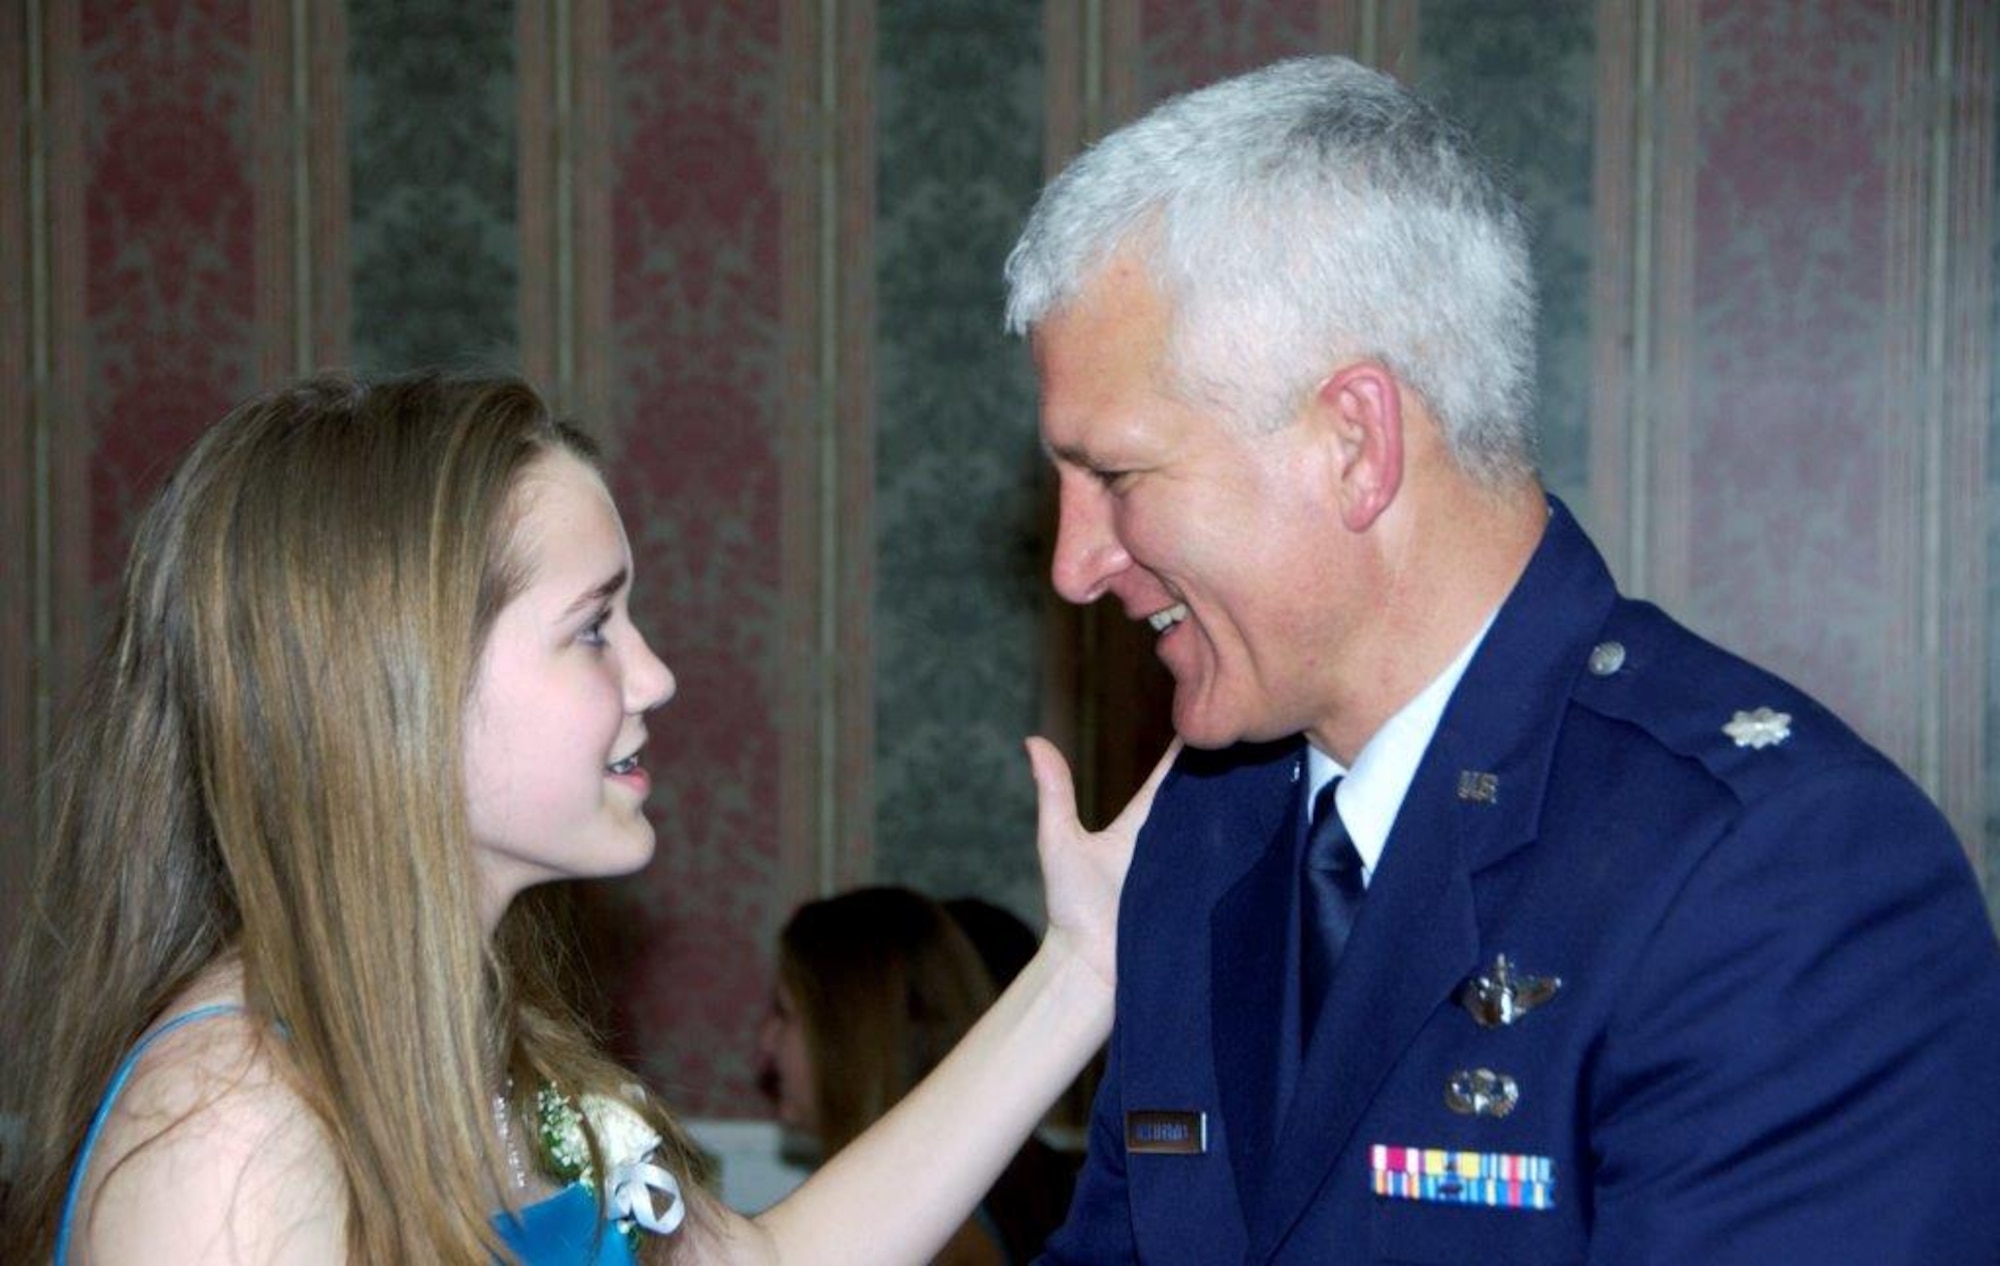 Senior Airman Brigette Waltermire and her father, now retired Lt. Col. James Waltermire, share a moment during a father-daughter cotillion dance in 2009.